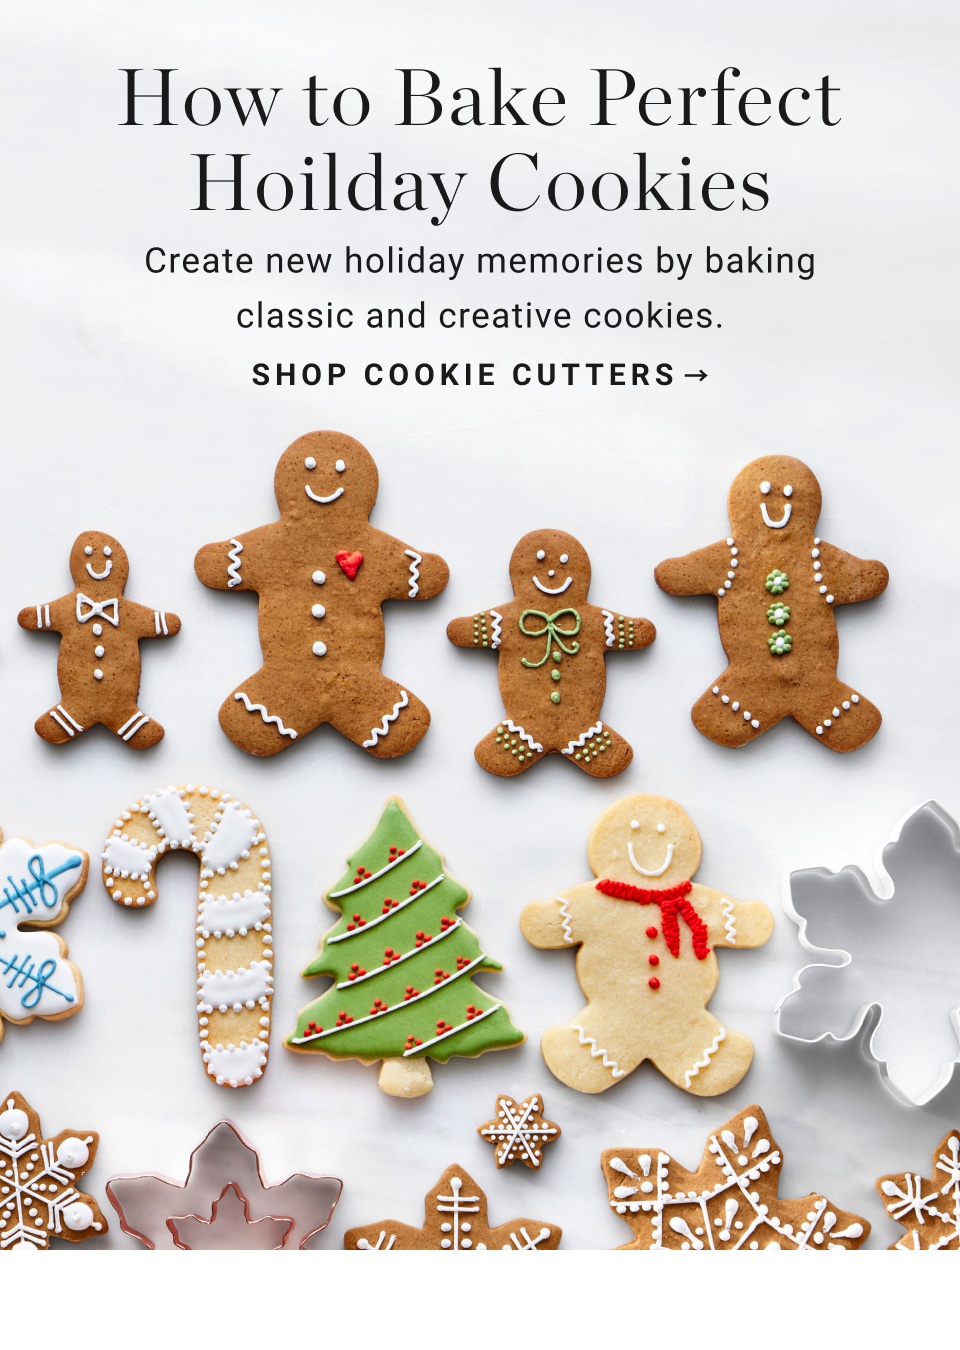 How to Bake Perfect Holiday Cookies